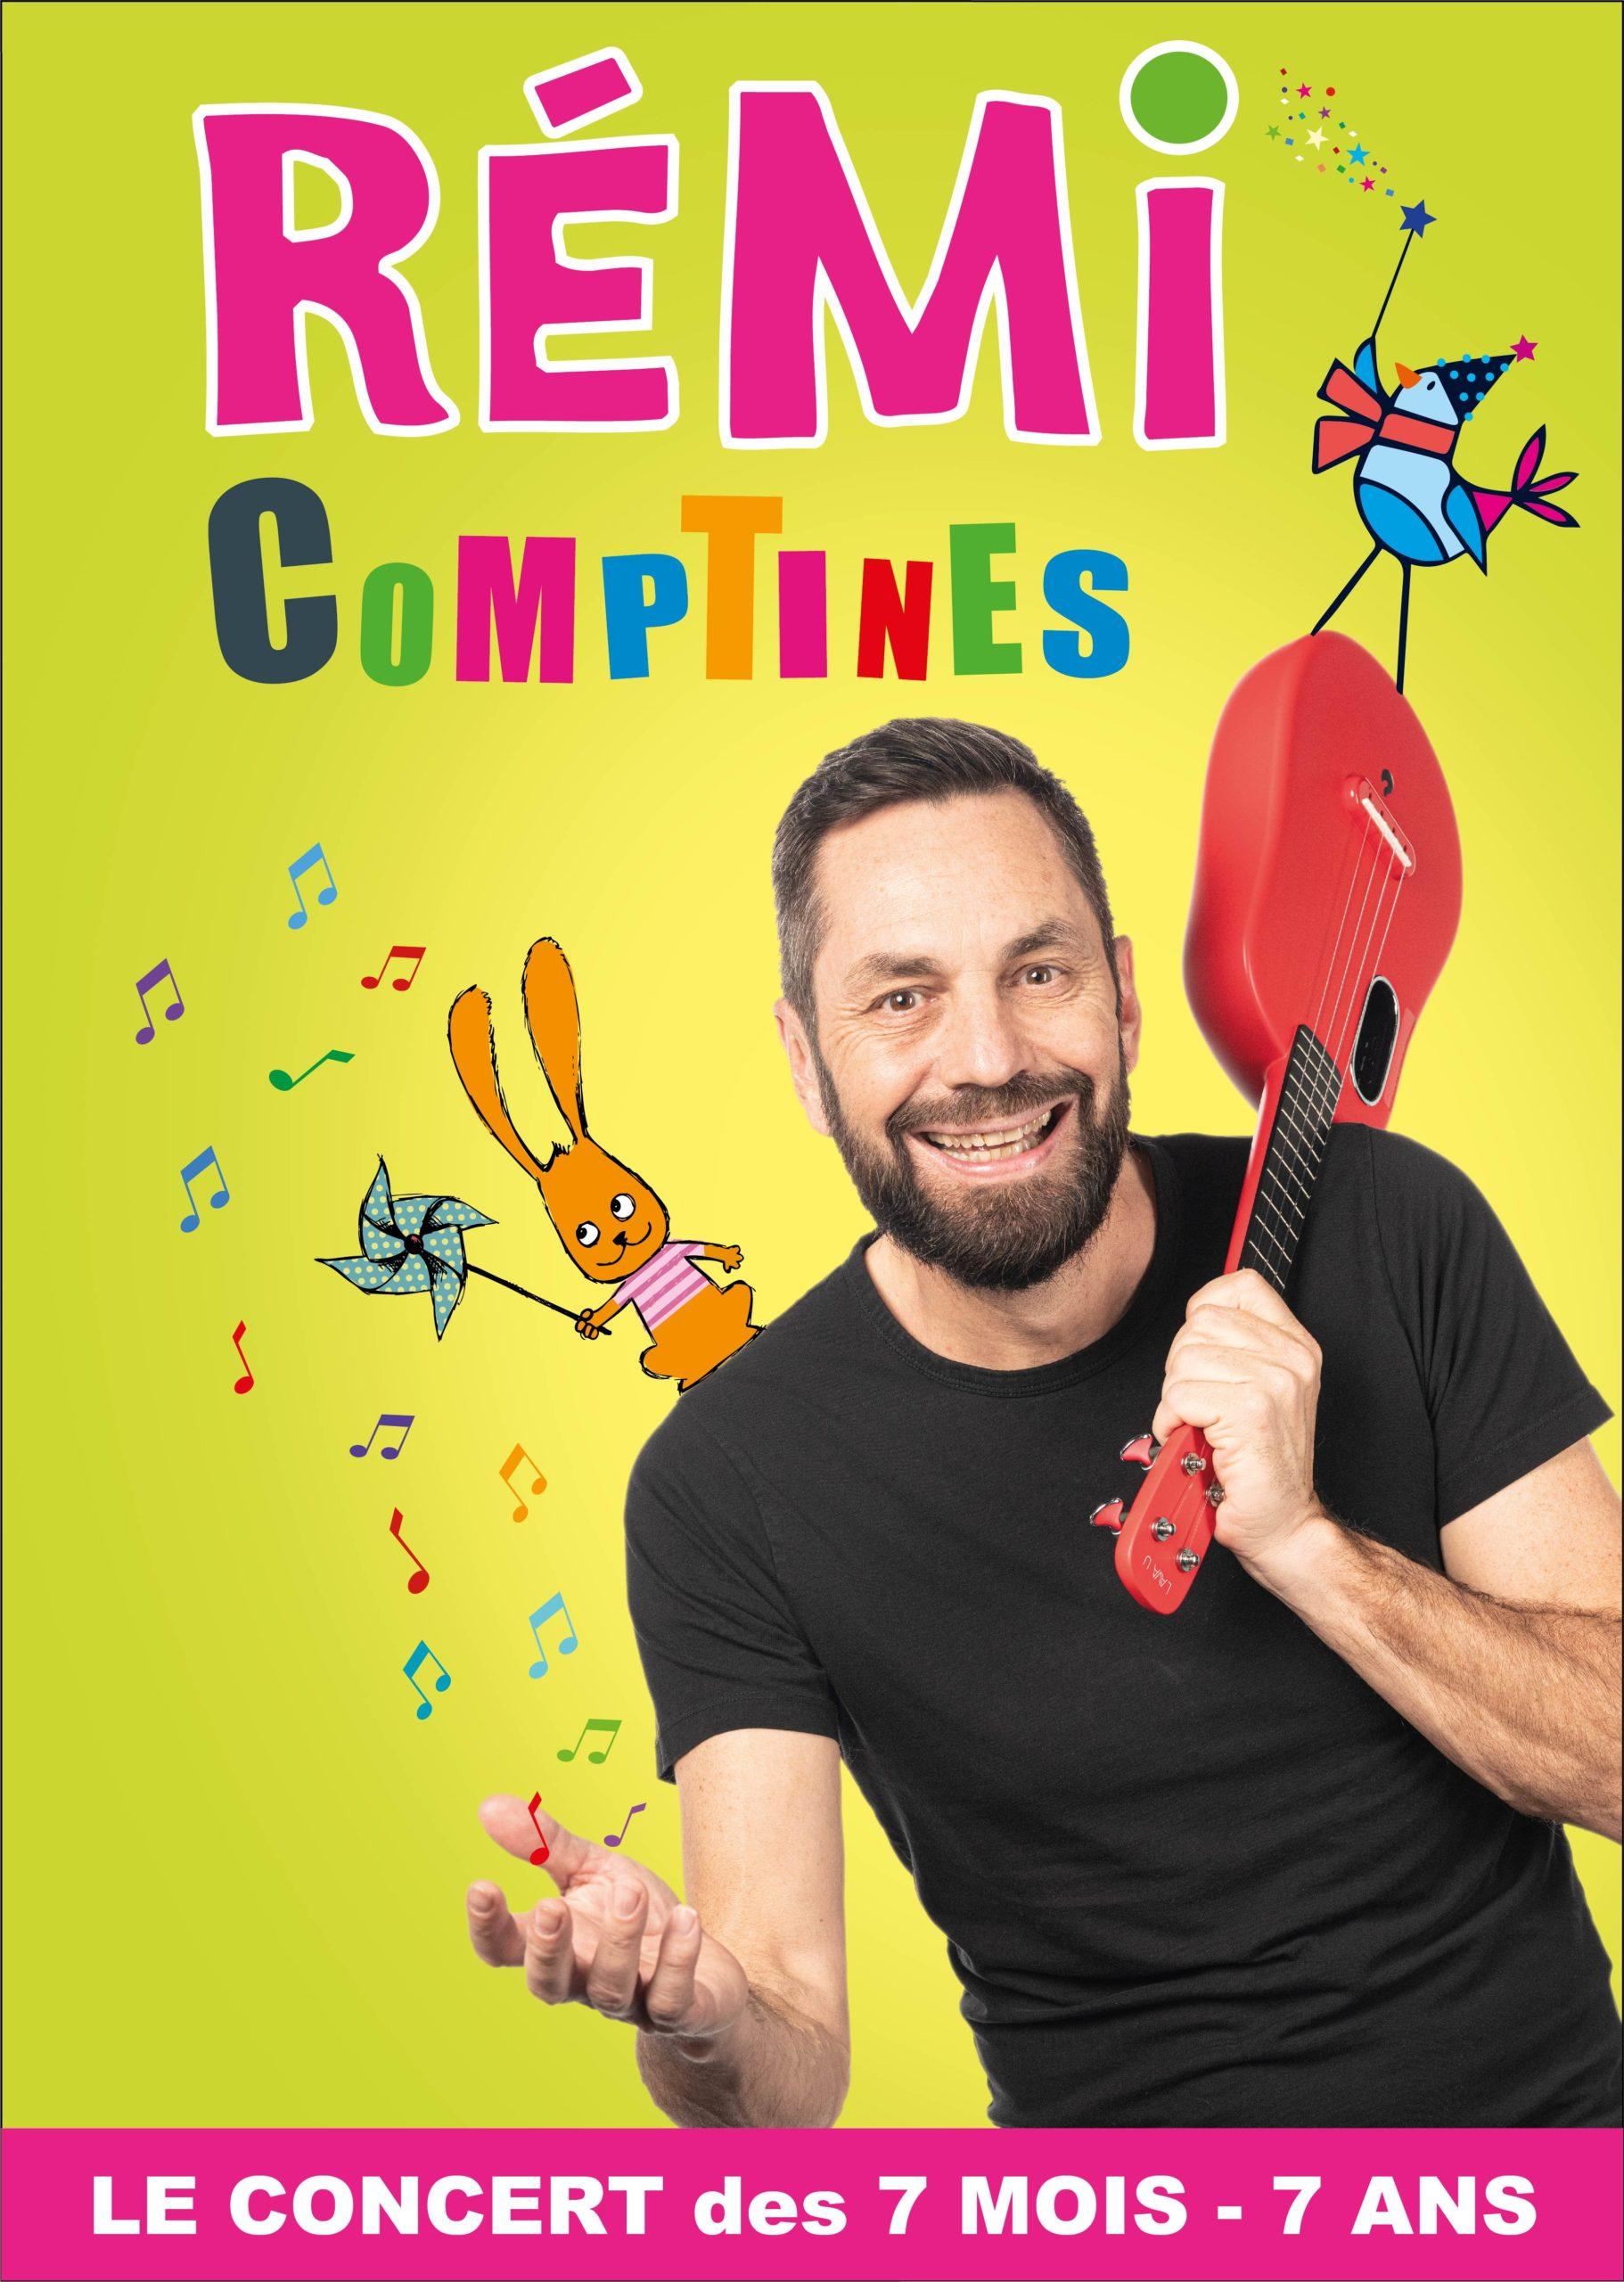 REMI COMPTINES - ROYAL COMEDY CLUB - REIMS (51)